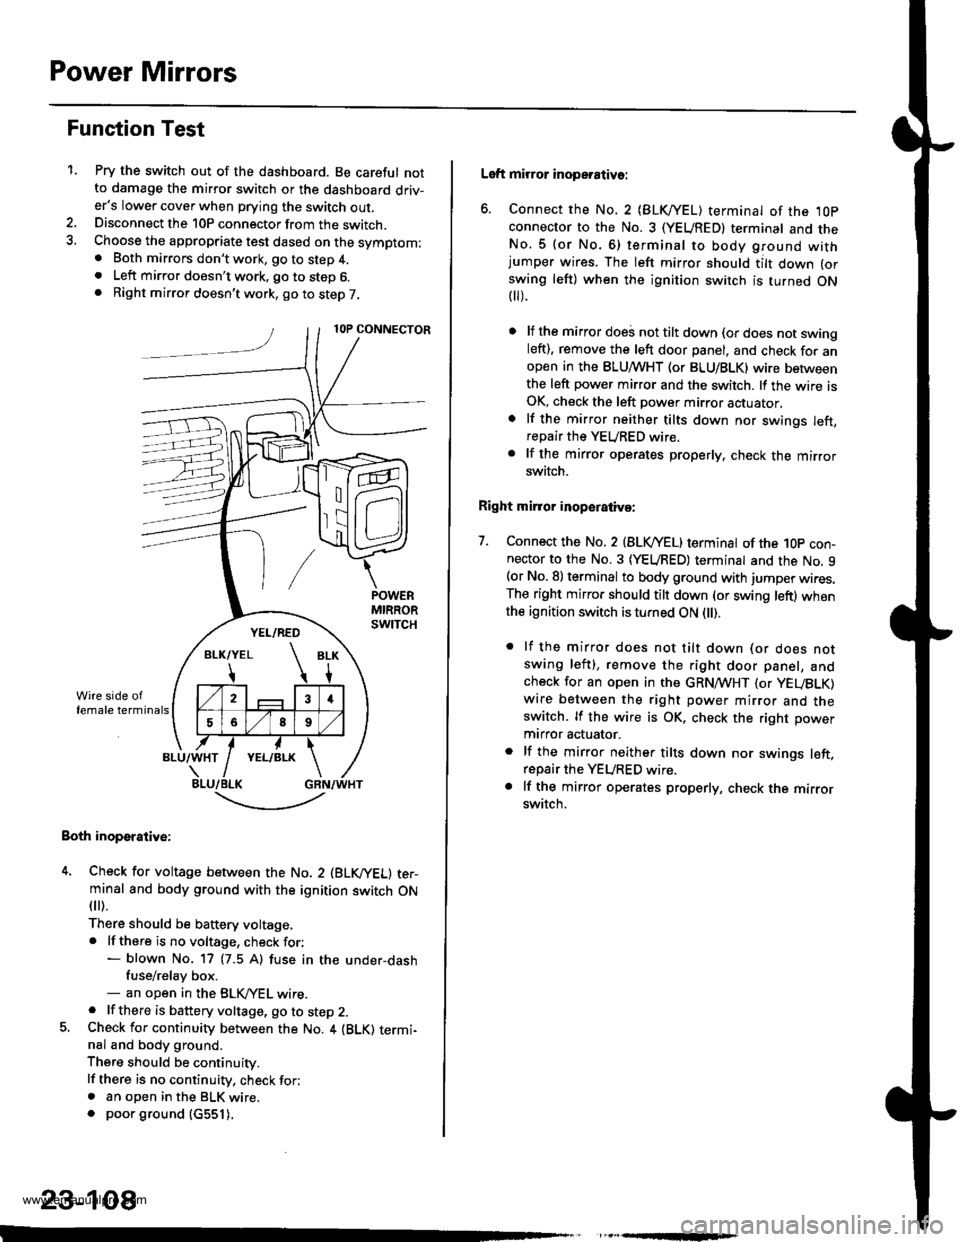 HONDA CR-V 1998 RD1-RD3 / 1.G Repair Manual 
Power Mirrors
Function Test
1.Pry the switch out of the dashboard. Be careful notto damage the mirror switch or the dashboard driv-ers lower cover when prying the switch out.Disconnect the 10P conne